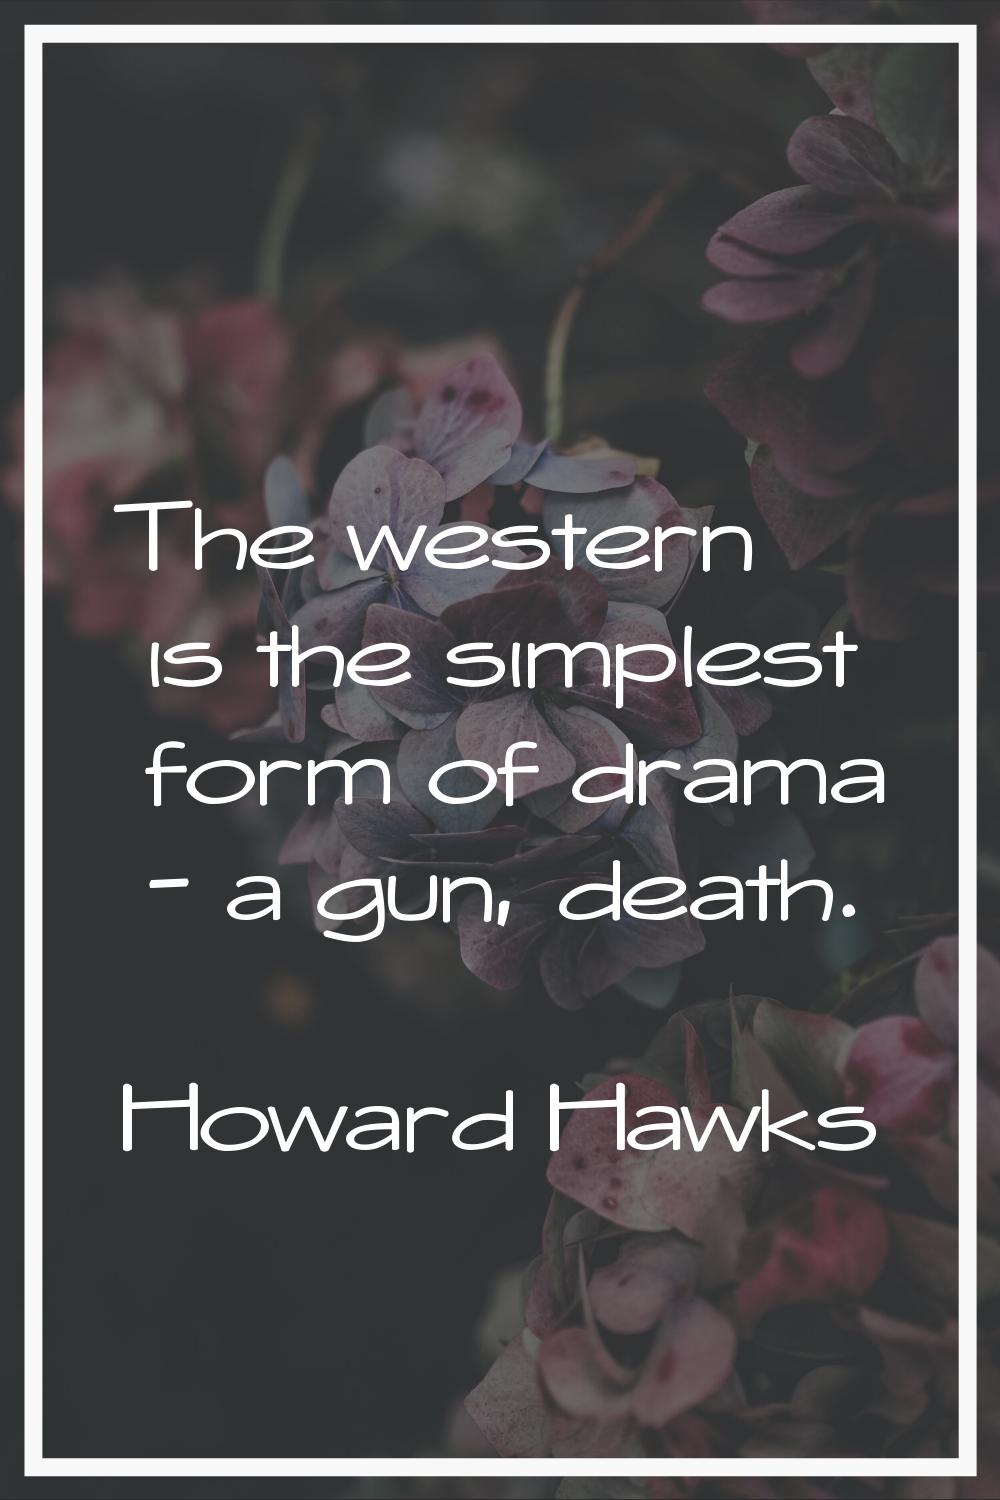 The western is the simplest form of drama - a gun, death.